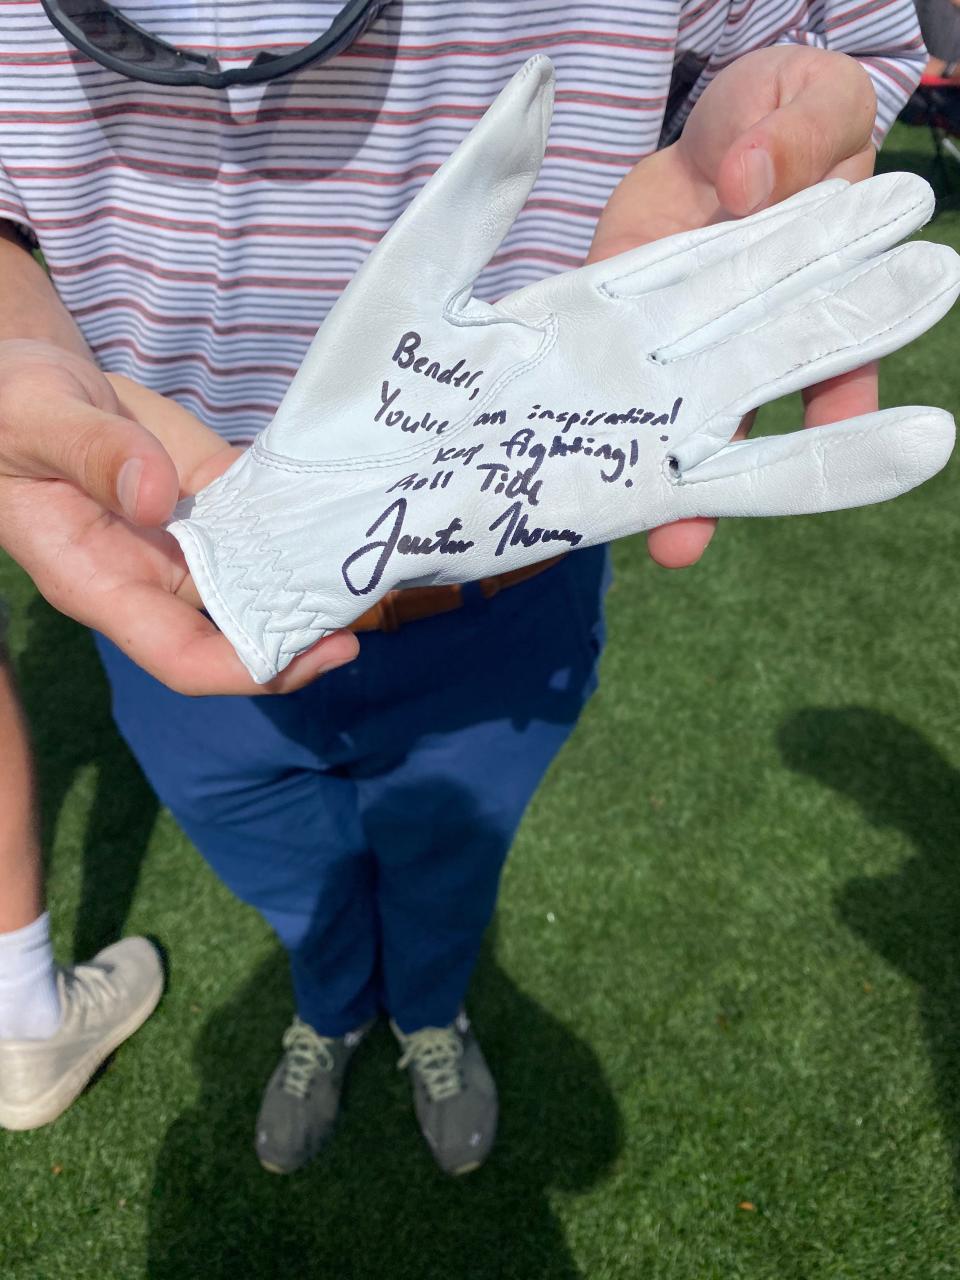 Bender Middlekauf of Jacksonville shows off the autographed glove he got from PGA Tour player and fellow Alabama fan Justin Thomas.